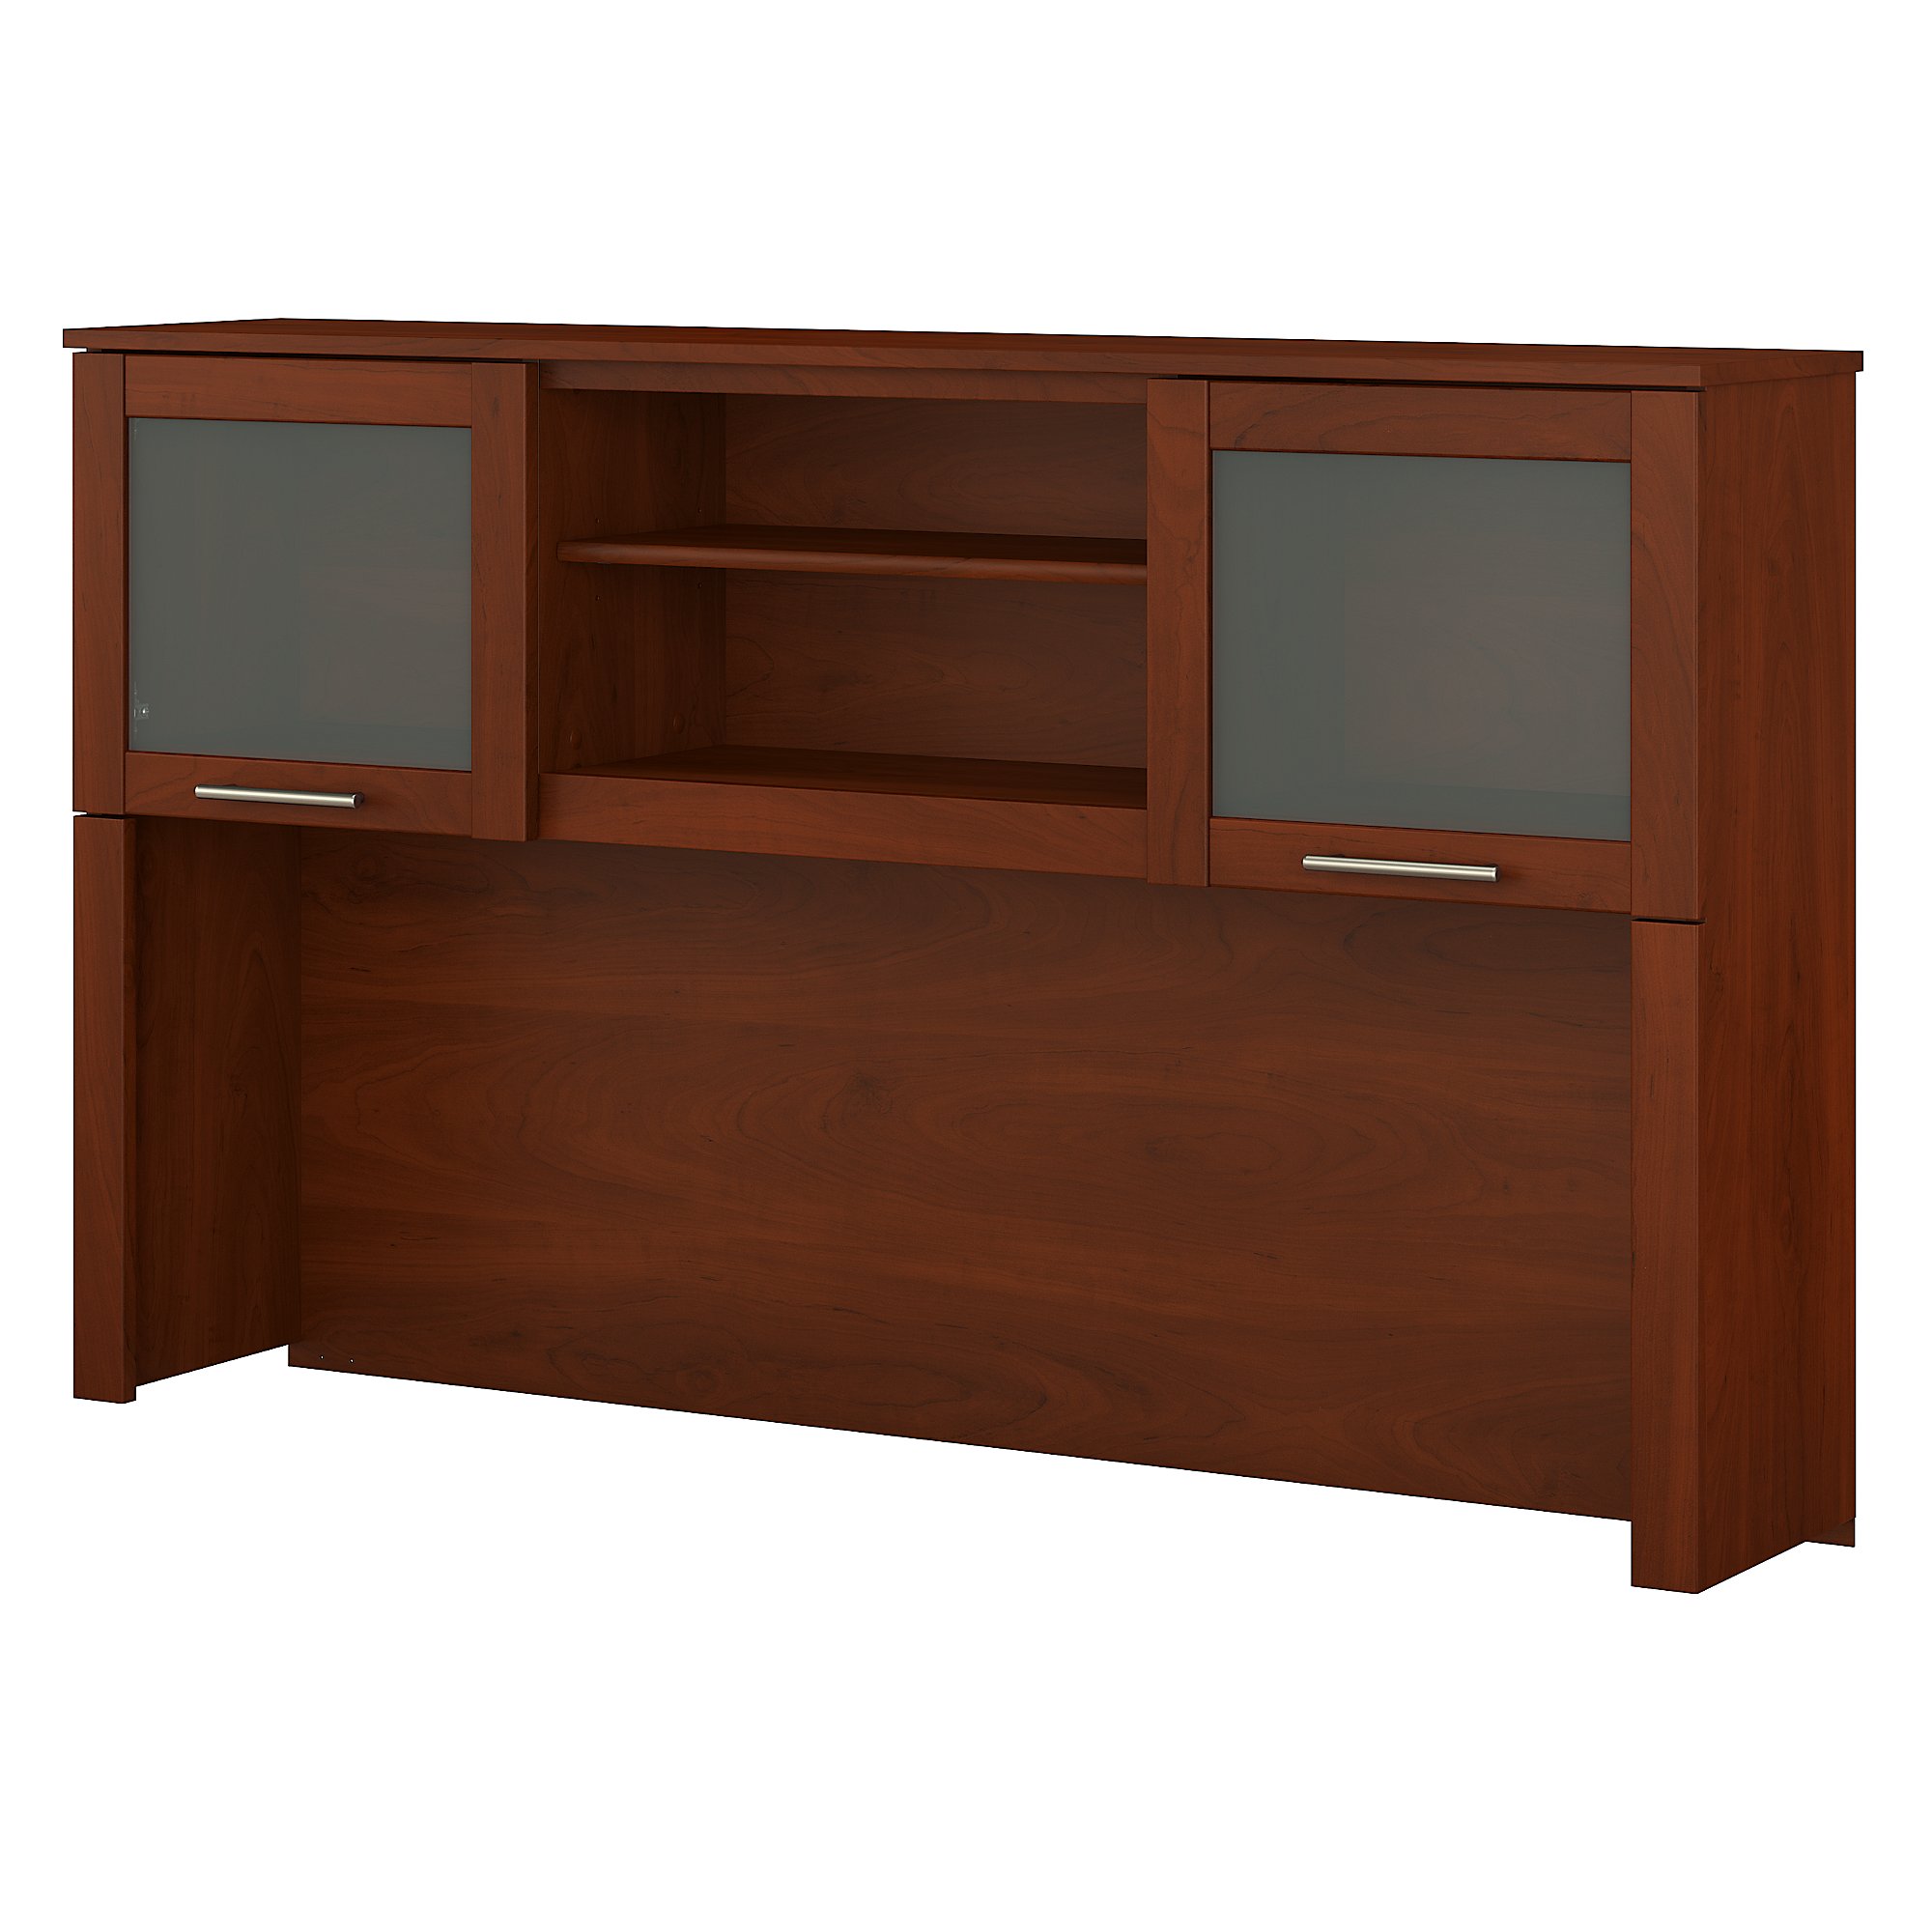 Bush Furniture Somerset 60 in 2-Door Hutch with Open Storage in Hansen Cherry - fits on Somerset 60 in L Desk (Sold Separately) - image 1 of 4